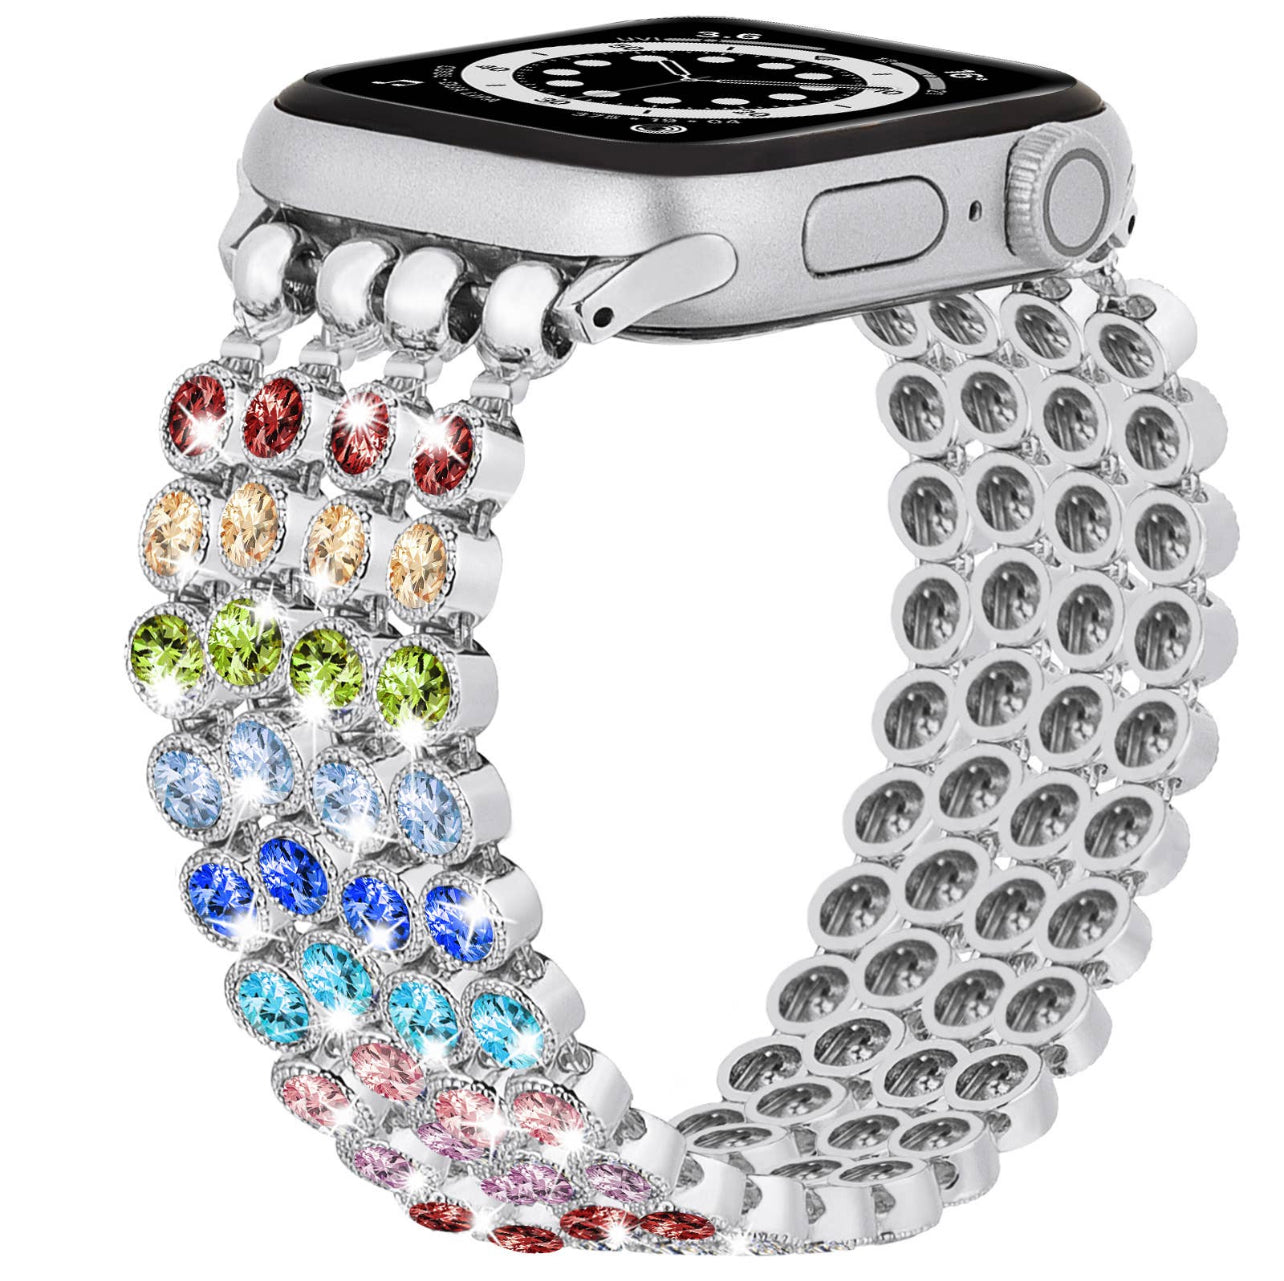 The Stella Band ( Made For iWatch Series)